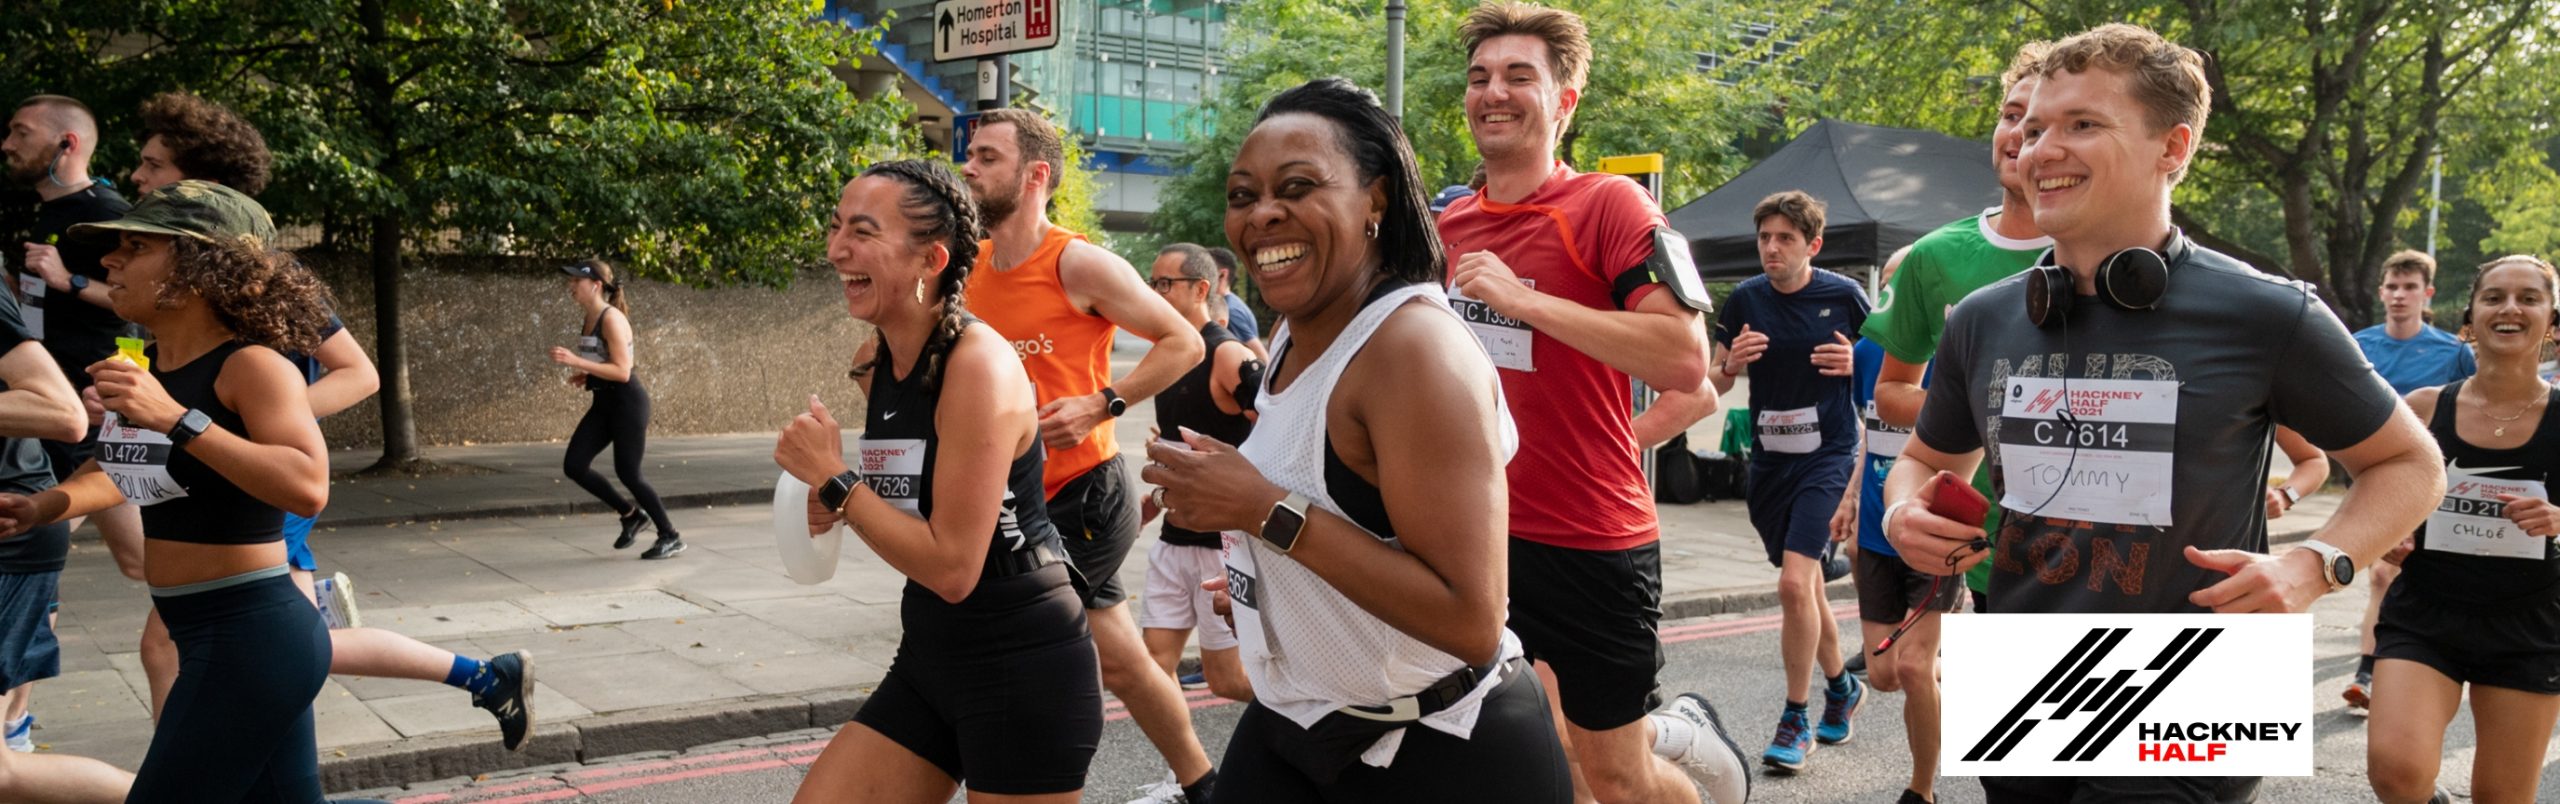 Hackney Half participants running the Hackney Half Marathon. They are smiling as they run. We hope that you will run the Hackney Half Marathon for Get KIds Going!